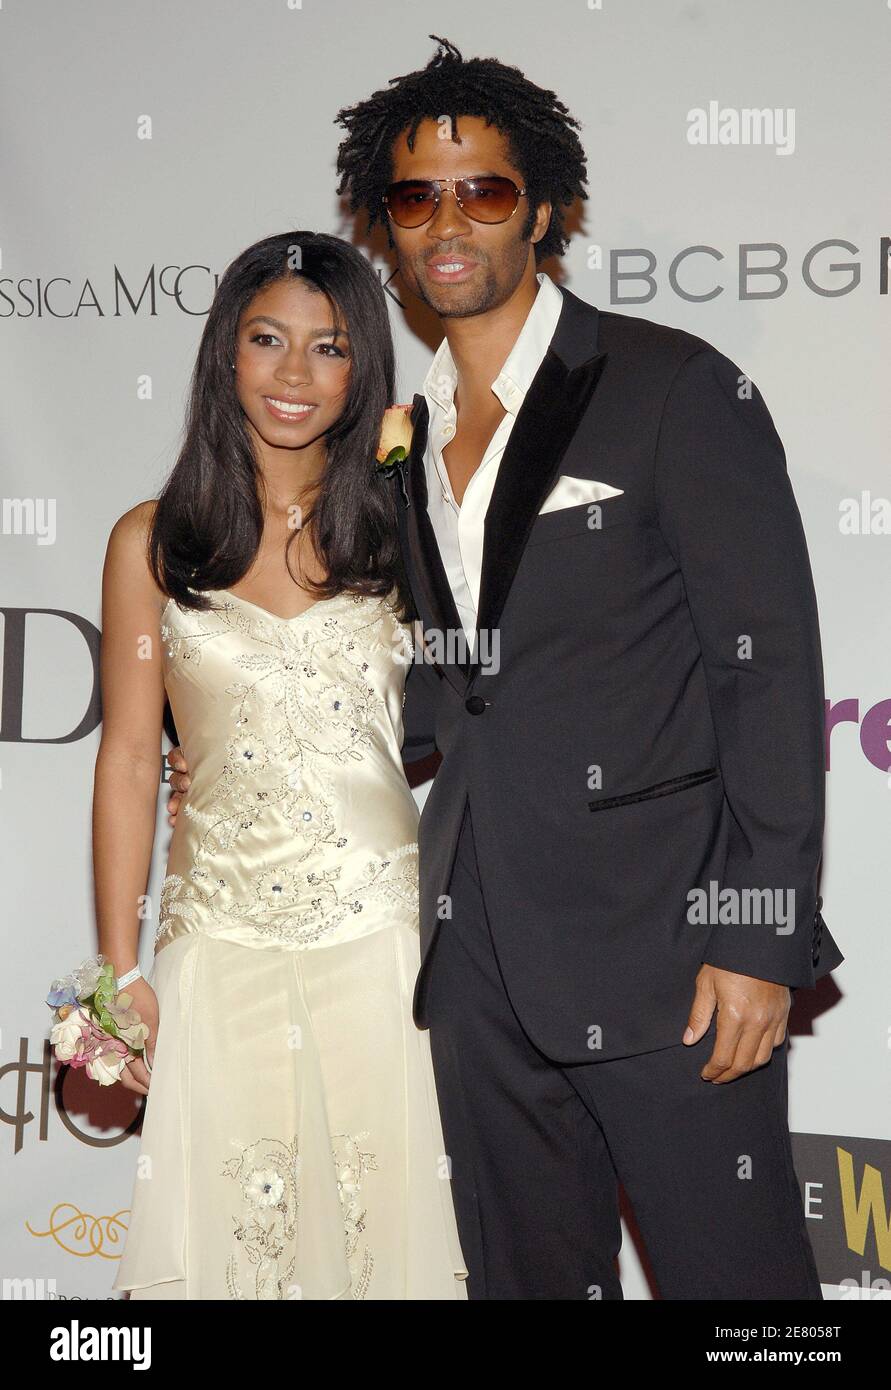 'Eric Benet and daughter India attend the first annual Planet Hope ''Class of Hope Prom 2007''. Planet Hope has created the prom initiative to help those in need fulfill their dream of attending the prom by raising funds and securing over 2,000 prom dresses and shoes to be distributed to students nation-wide. Los Angeles, April 21, 2007. Photo by Lionel Hahn/ABACAPRESS.COM' Stock Photo